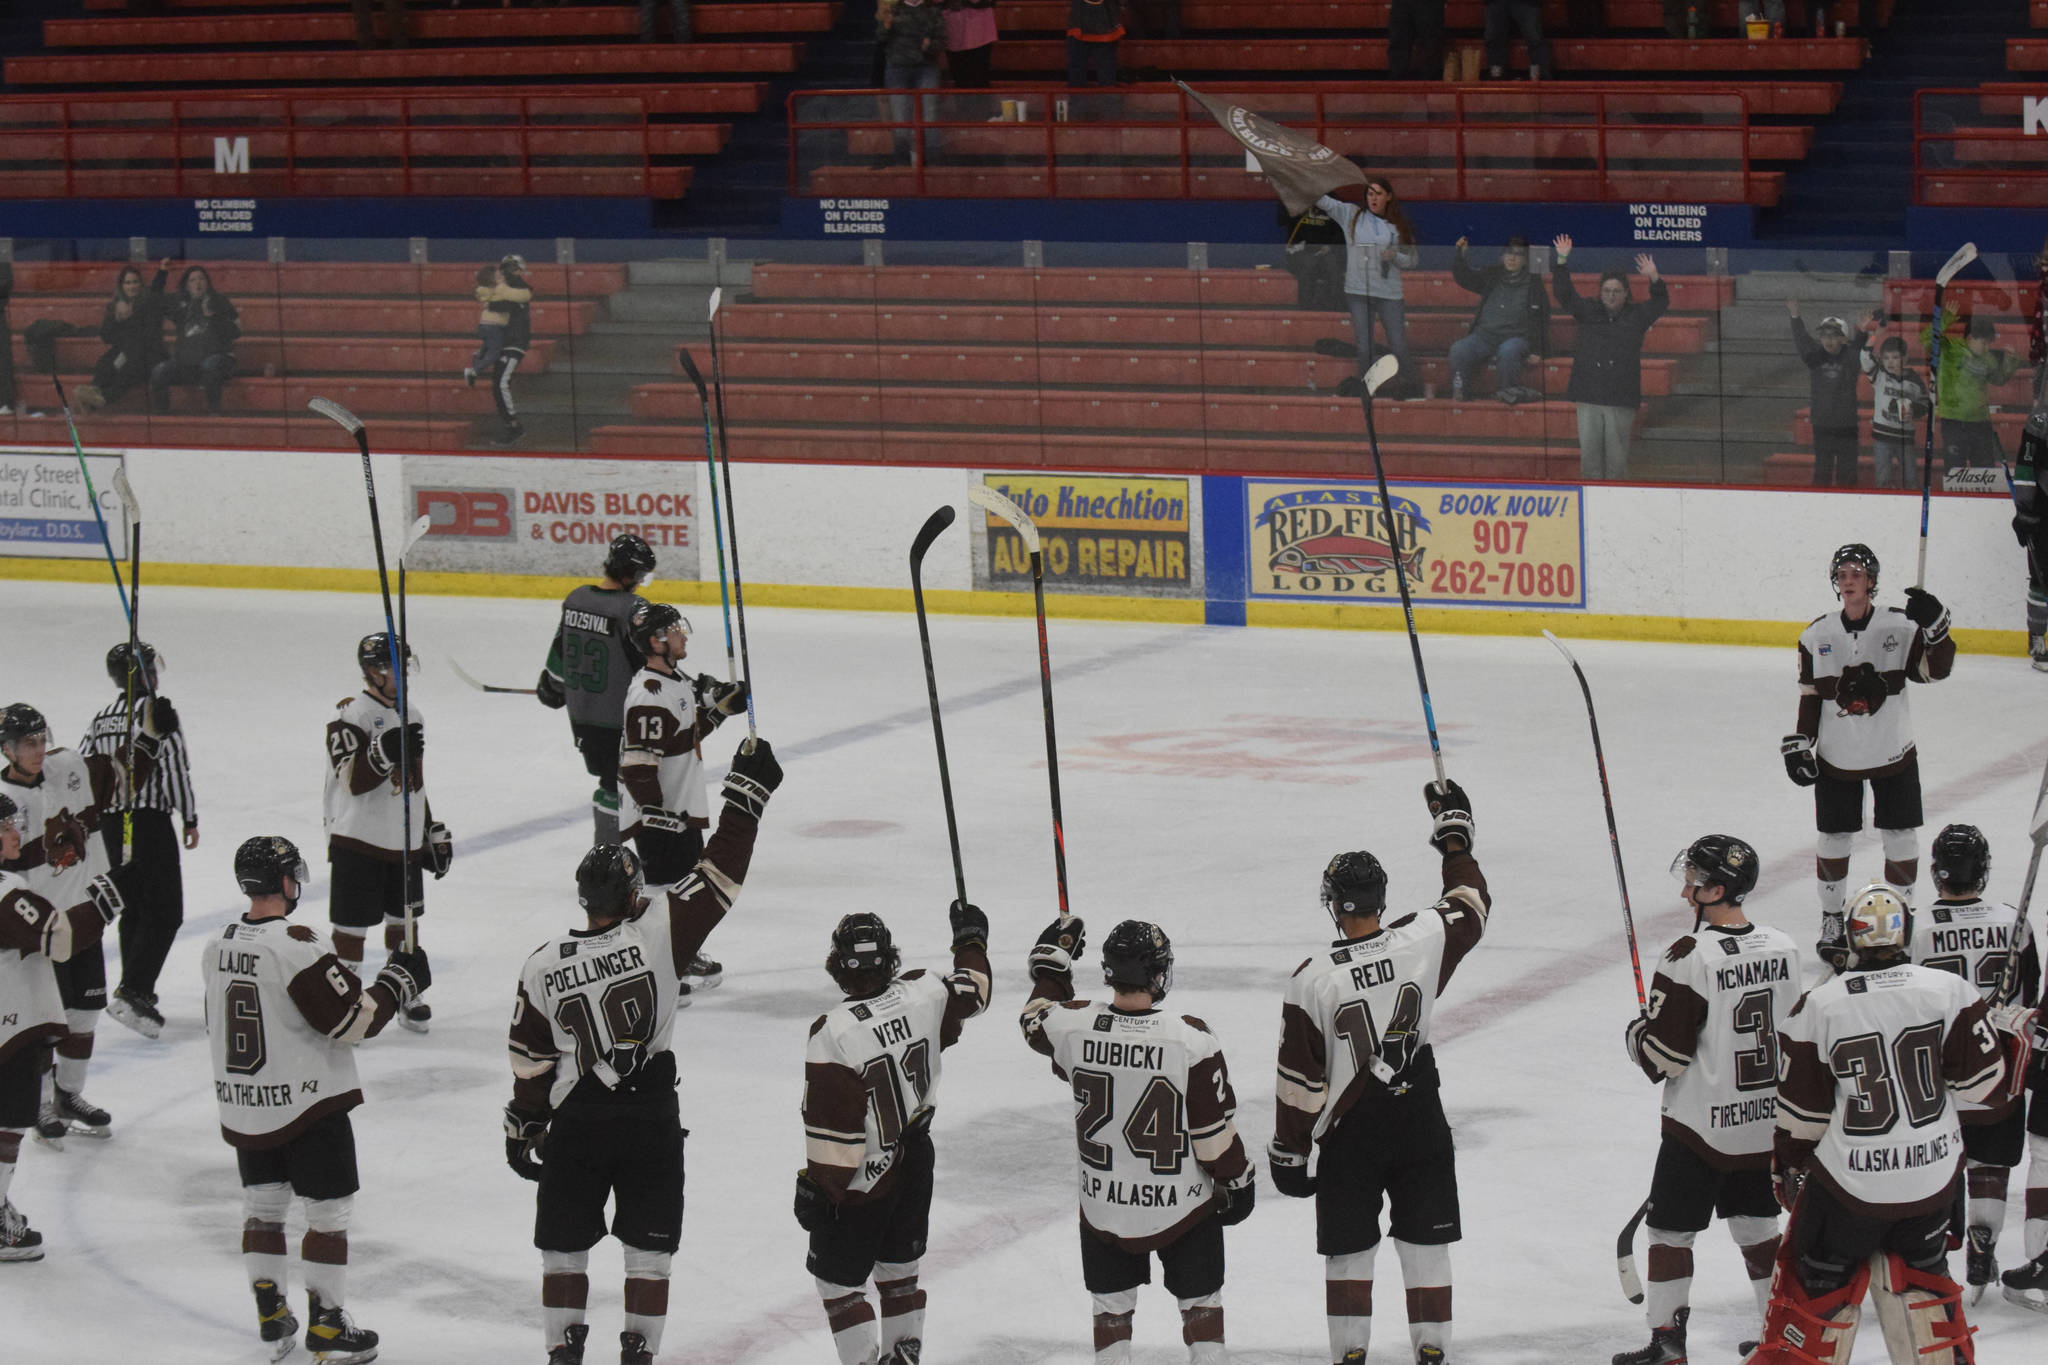 The Kenai River Brown Bears salute seats mostly empty due to coronavirus mitigation measures after a victory over the Chippewa (Wisconsin) Steel on Friday, April 23, 2021, at the Soldotna Regional Sports Complex in Soldotna, Alaska. (Photo by Jeff Helminiak/Peninsula Clarion)